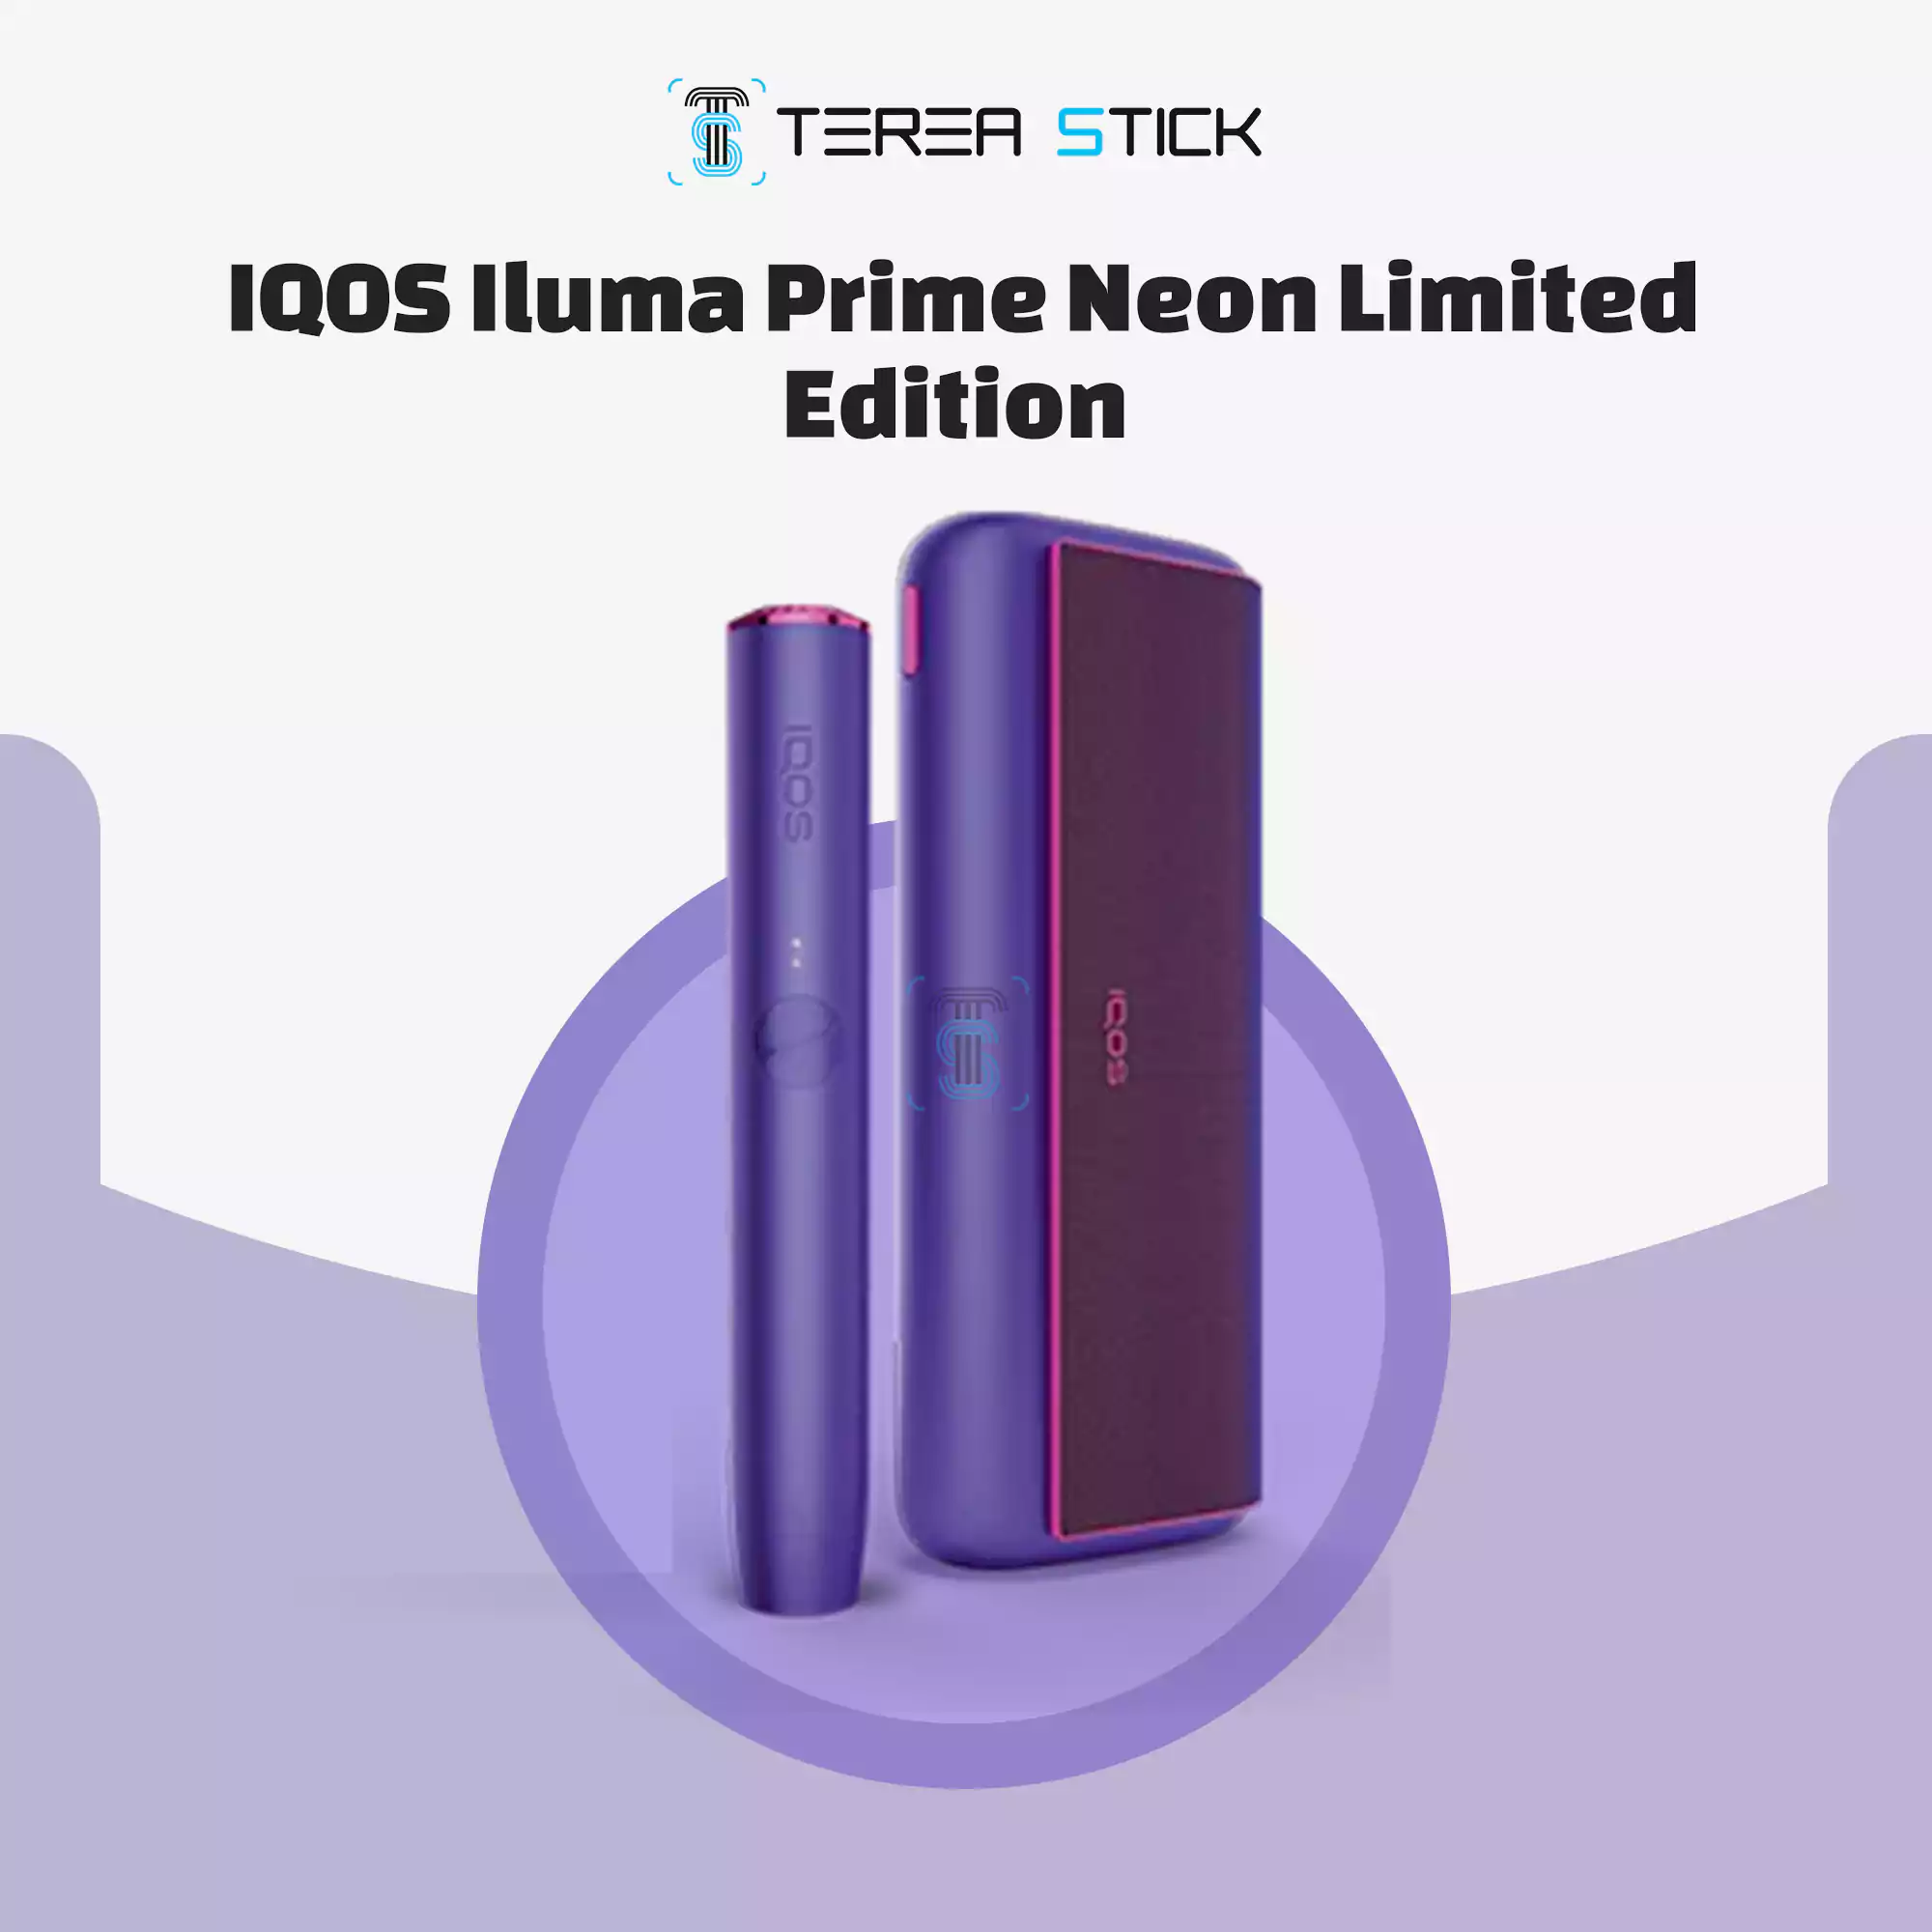 Buy Online Iqos ILUMA PRIME OASIS Limited Edition - price AED520